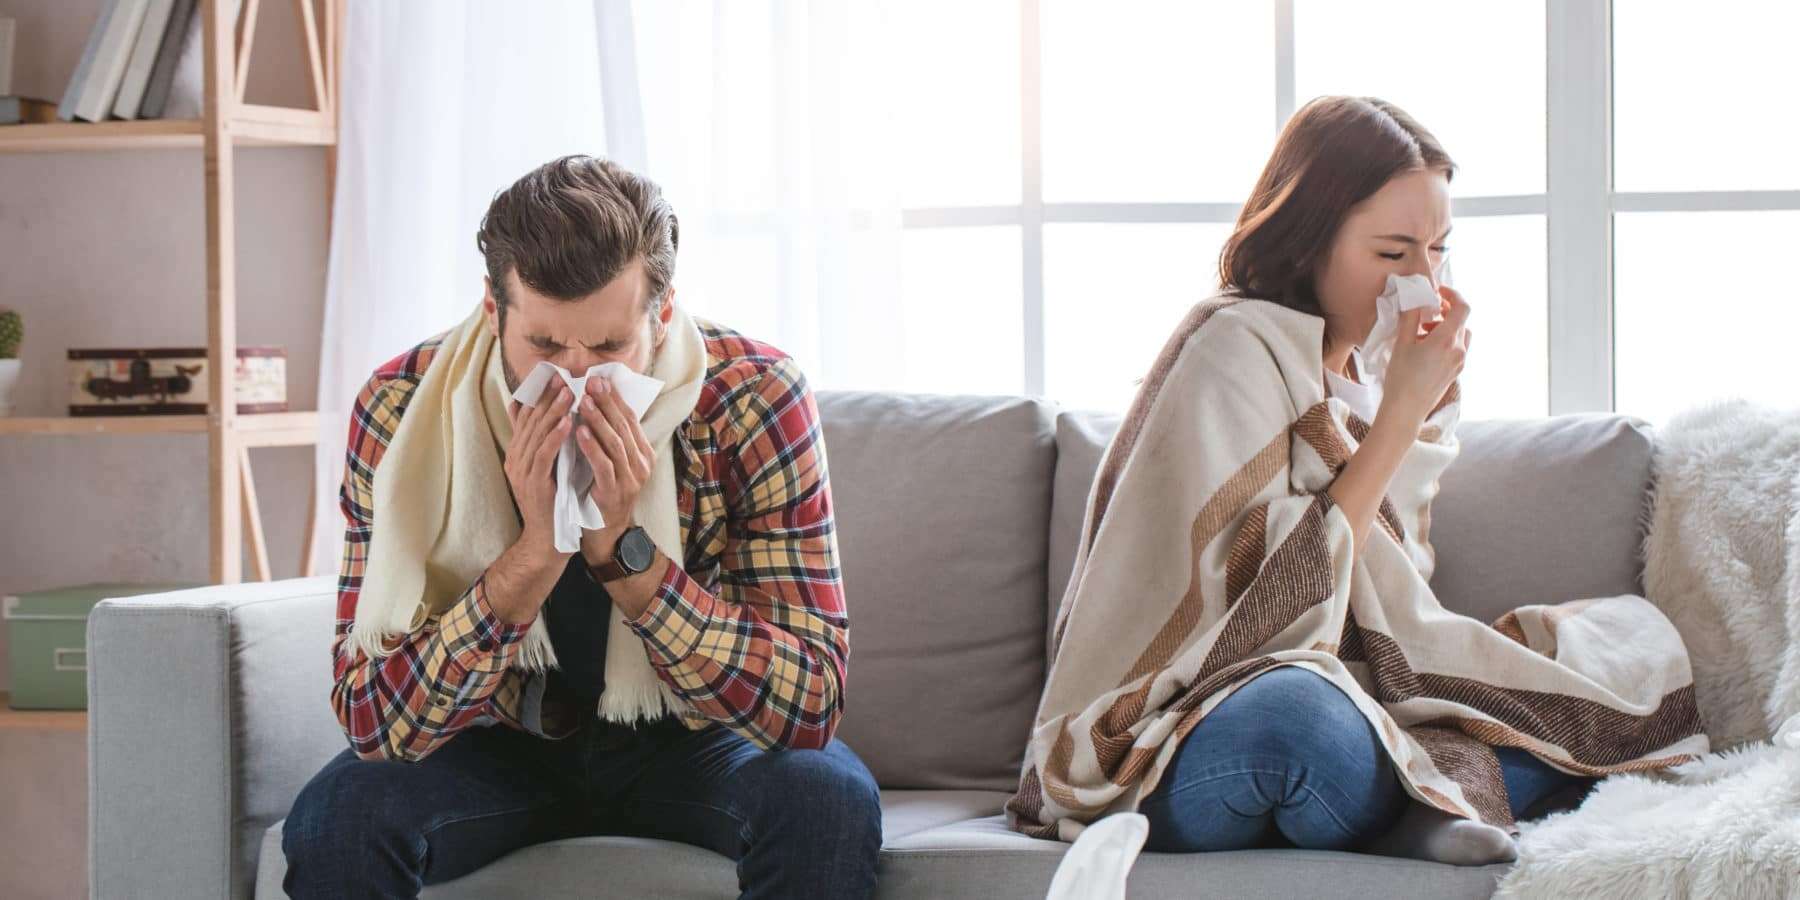 Young couple sitting on the couch together sick from mold sickness.